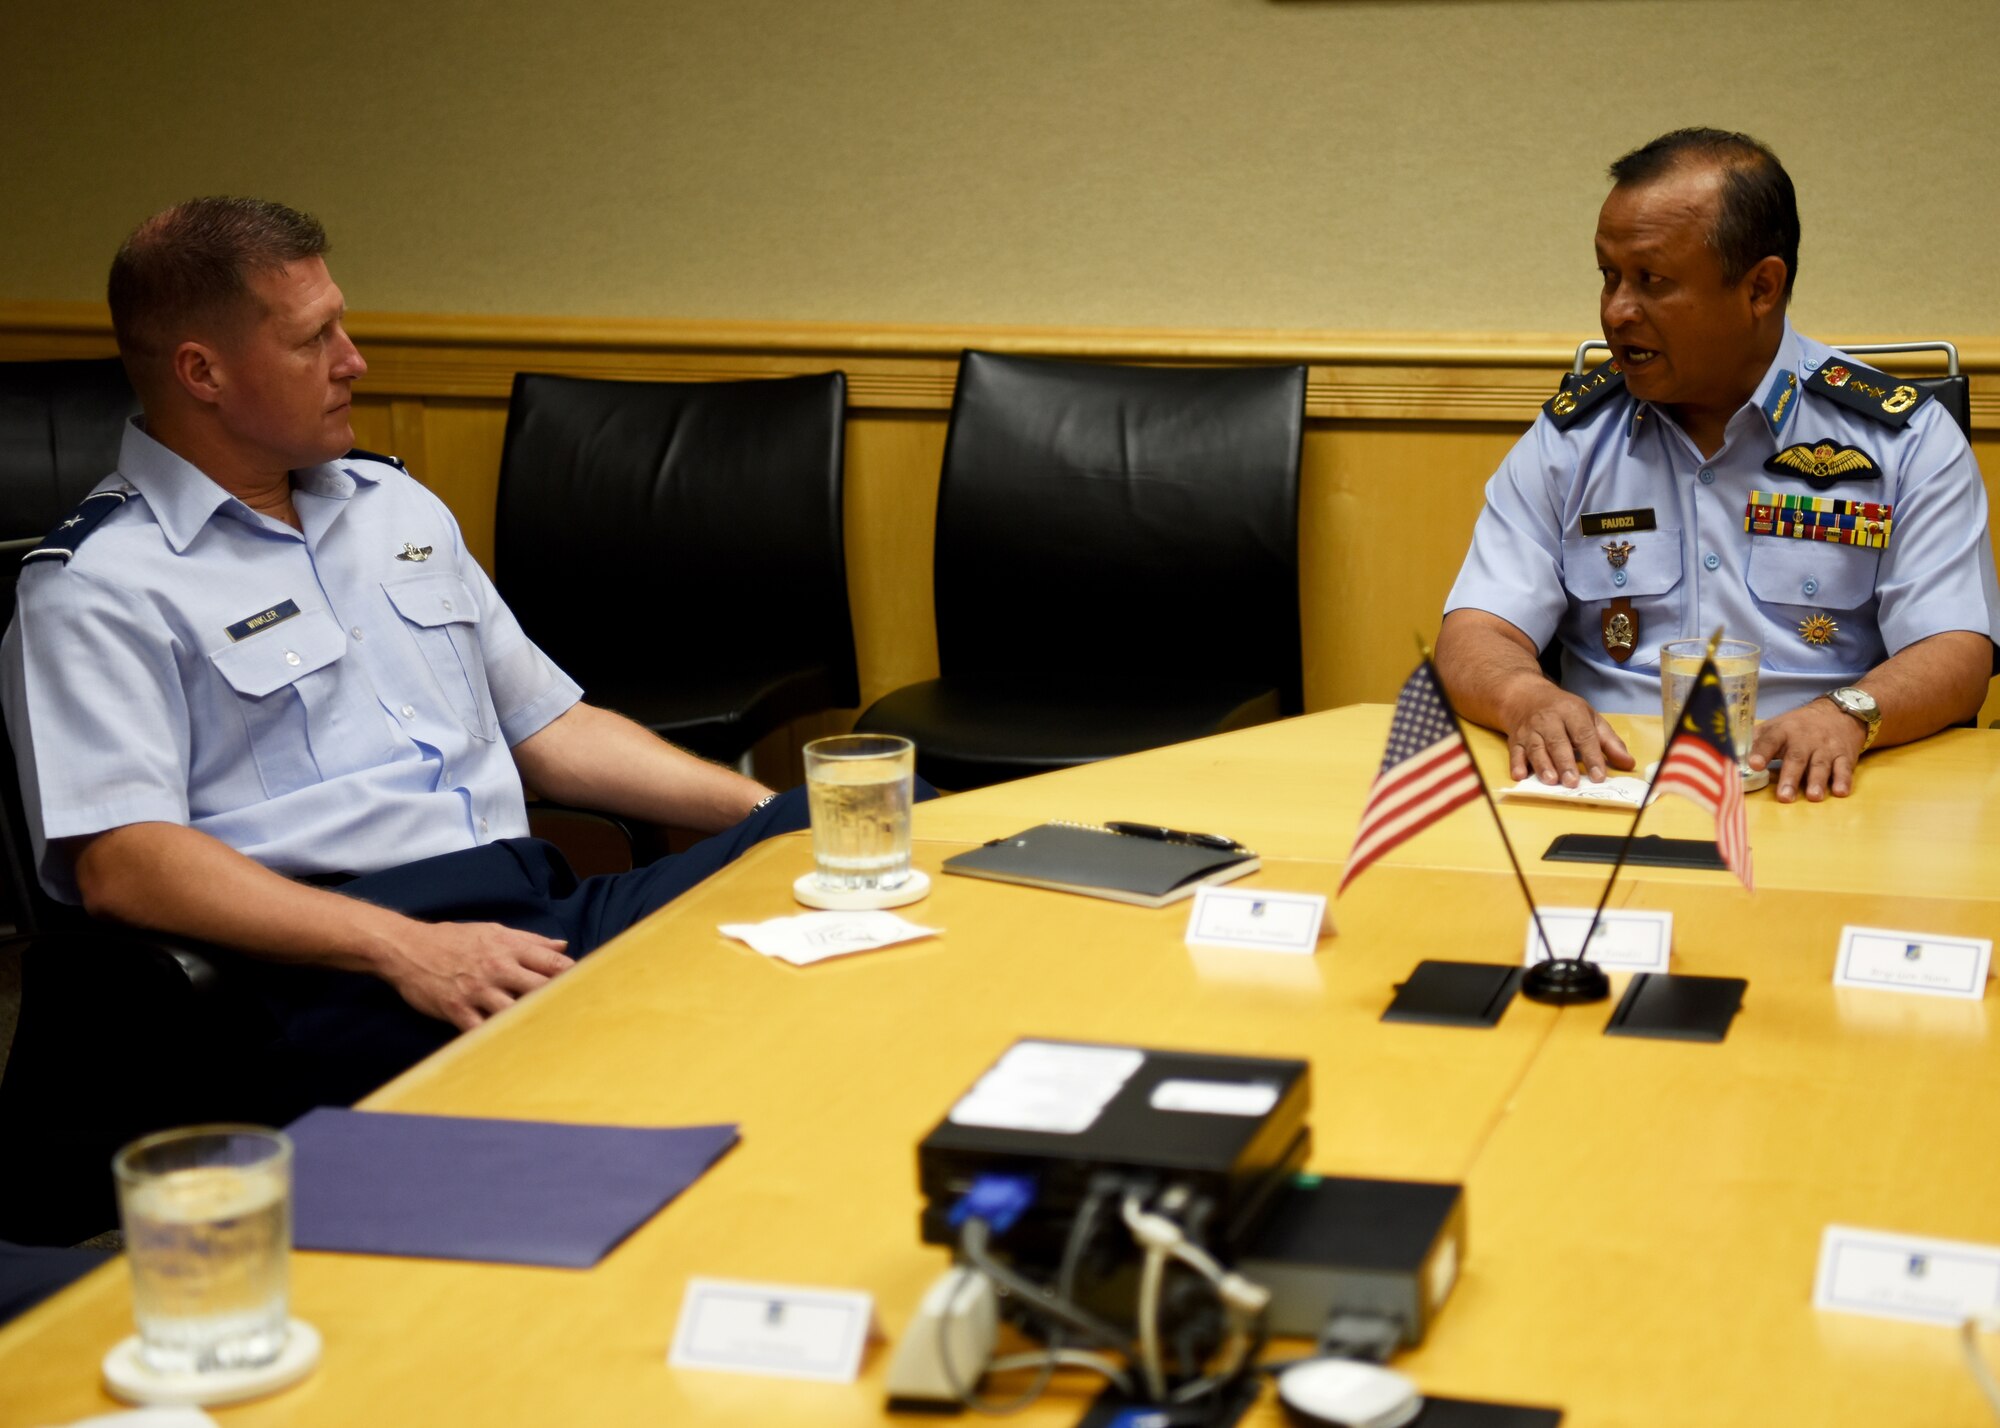 U.S. Air Force Brig. Gen. Michael Winkler, Pacific Air Forces Strategy, Plans, and Programs director, discusses the U.S. and Malaysian military relationship with Maj. Gen. Dato’ Hj Mohd Faudzi bin Hj Ahmad, Royal Malaysian Air Force (RMAF), Assistant Chief of Staff for Operations and Strategy, on Joint Base Pearl Harbor-Hickam, Hawaii, Sept. 5, 2018.